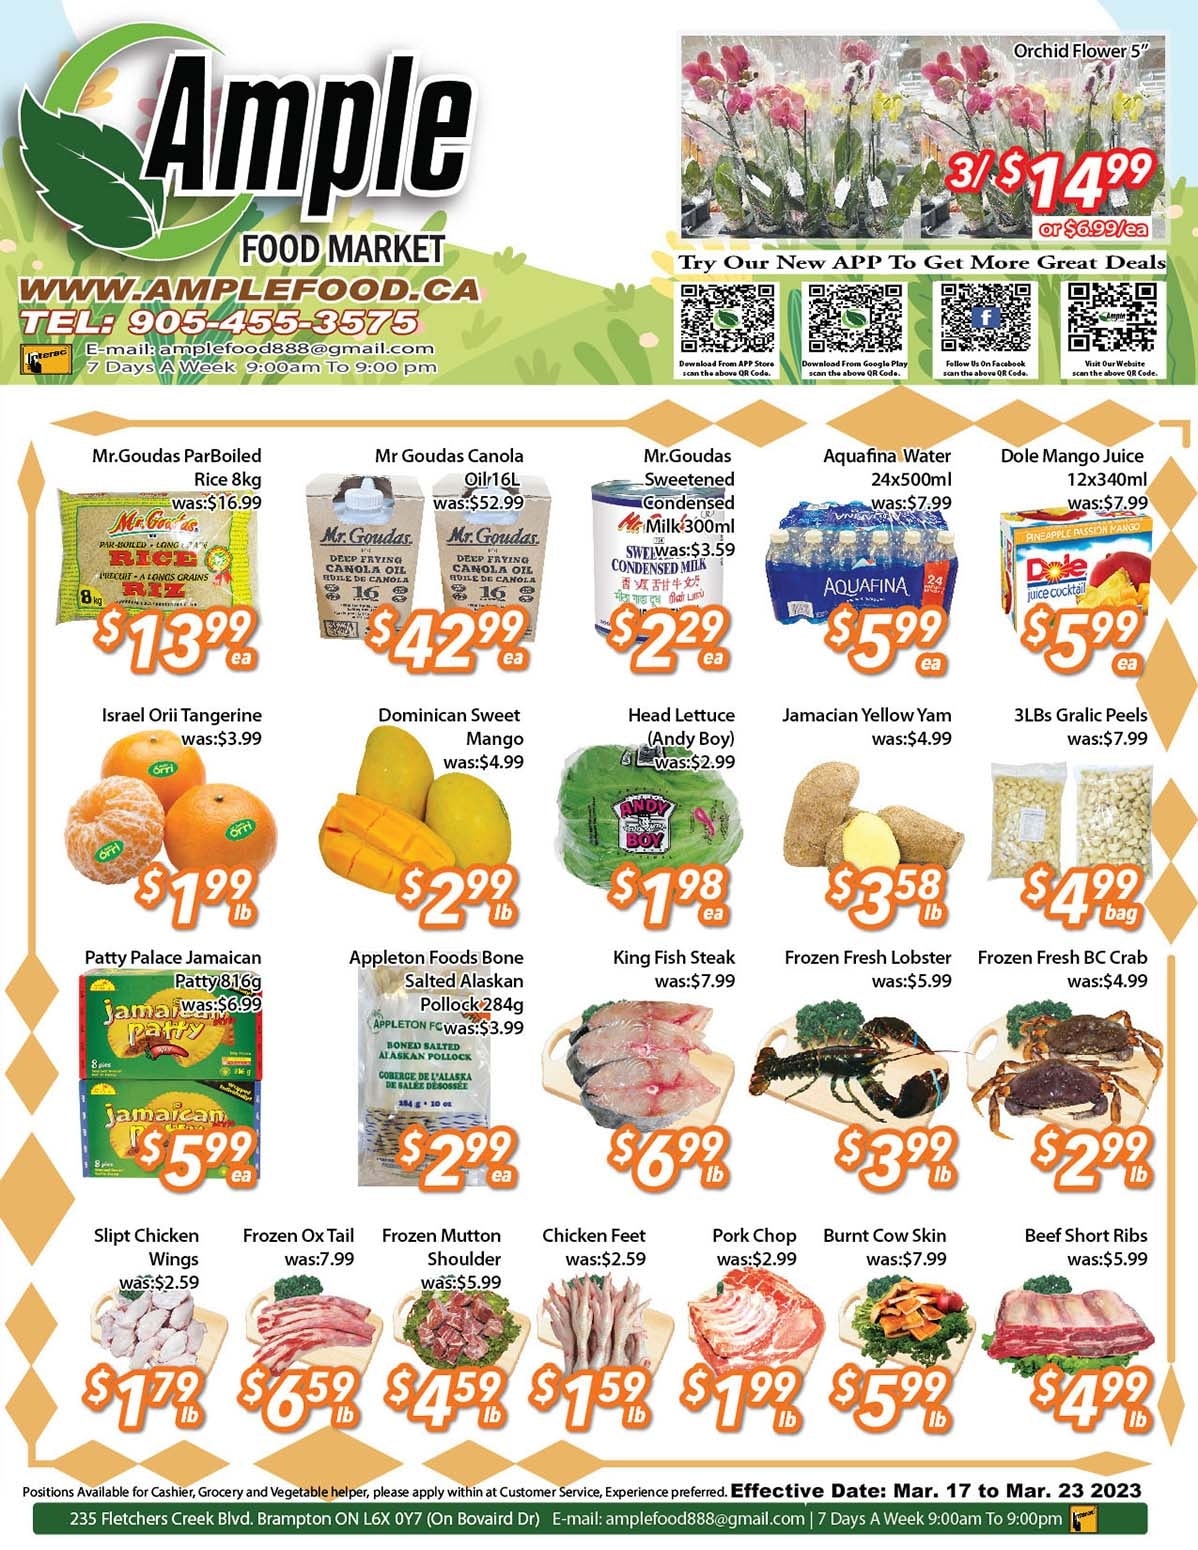 Ample Food Market - Brampton Store - Weekly Flyer Specials - Page 1